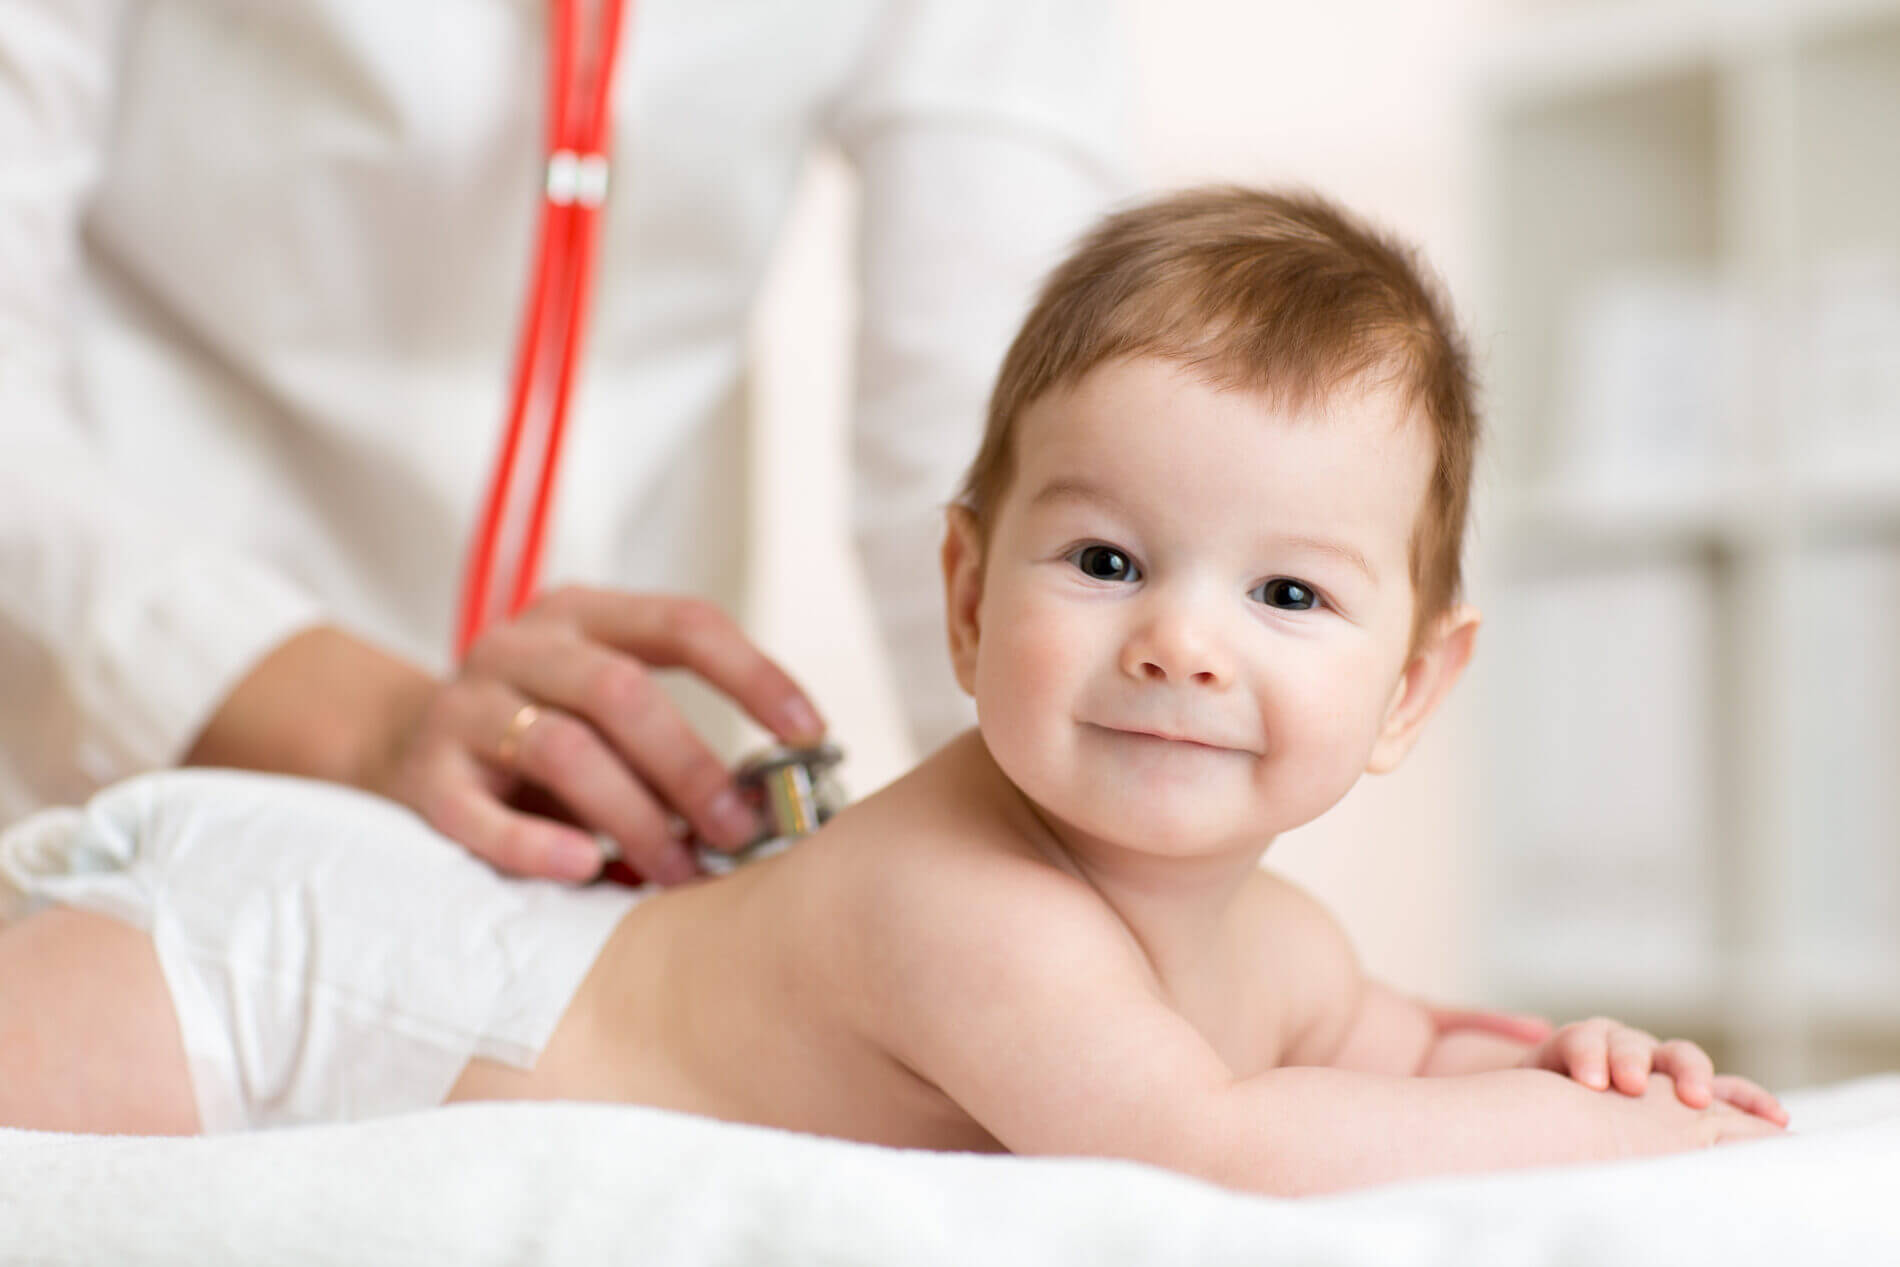 Improving infant patient outcomes by providing clinicians with powerful insight